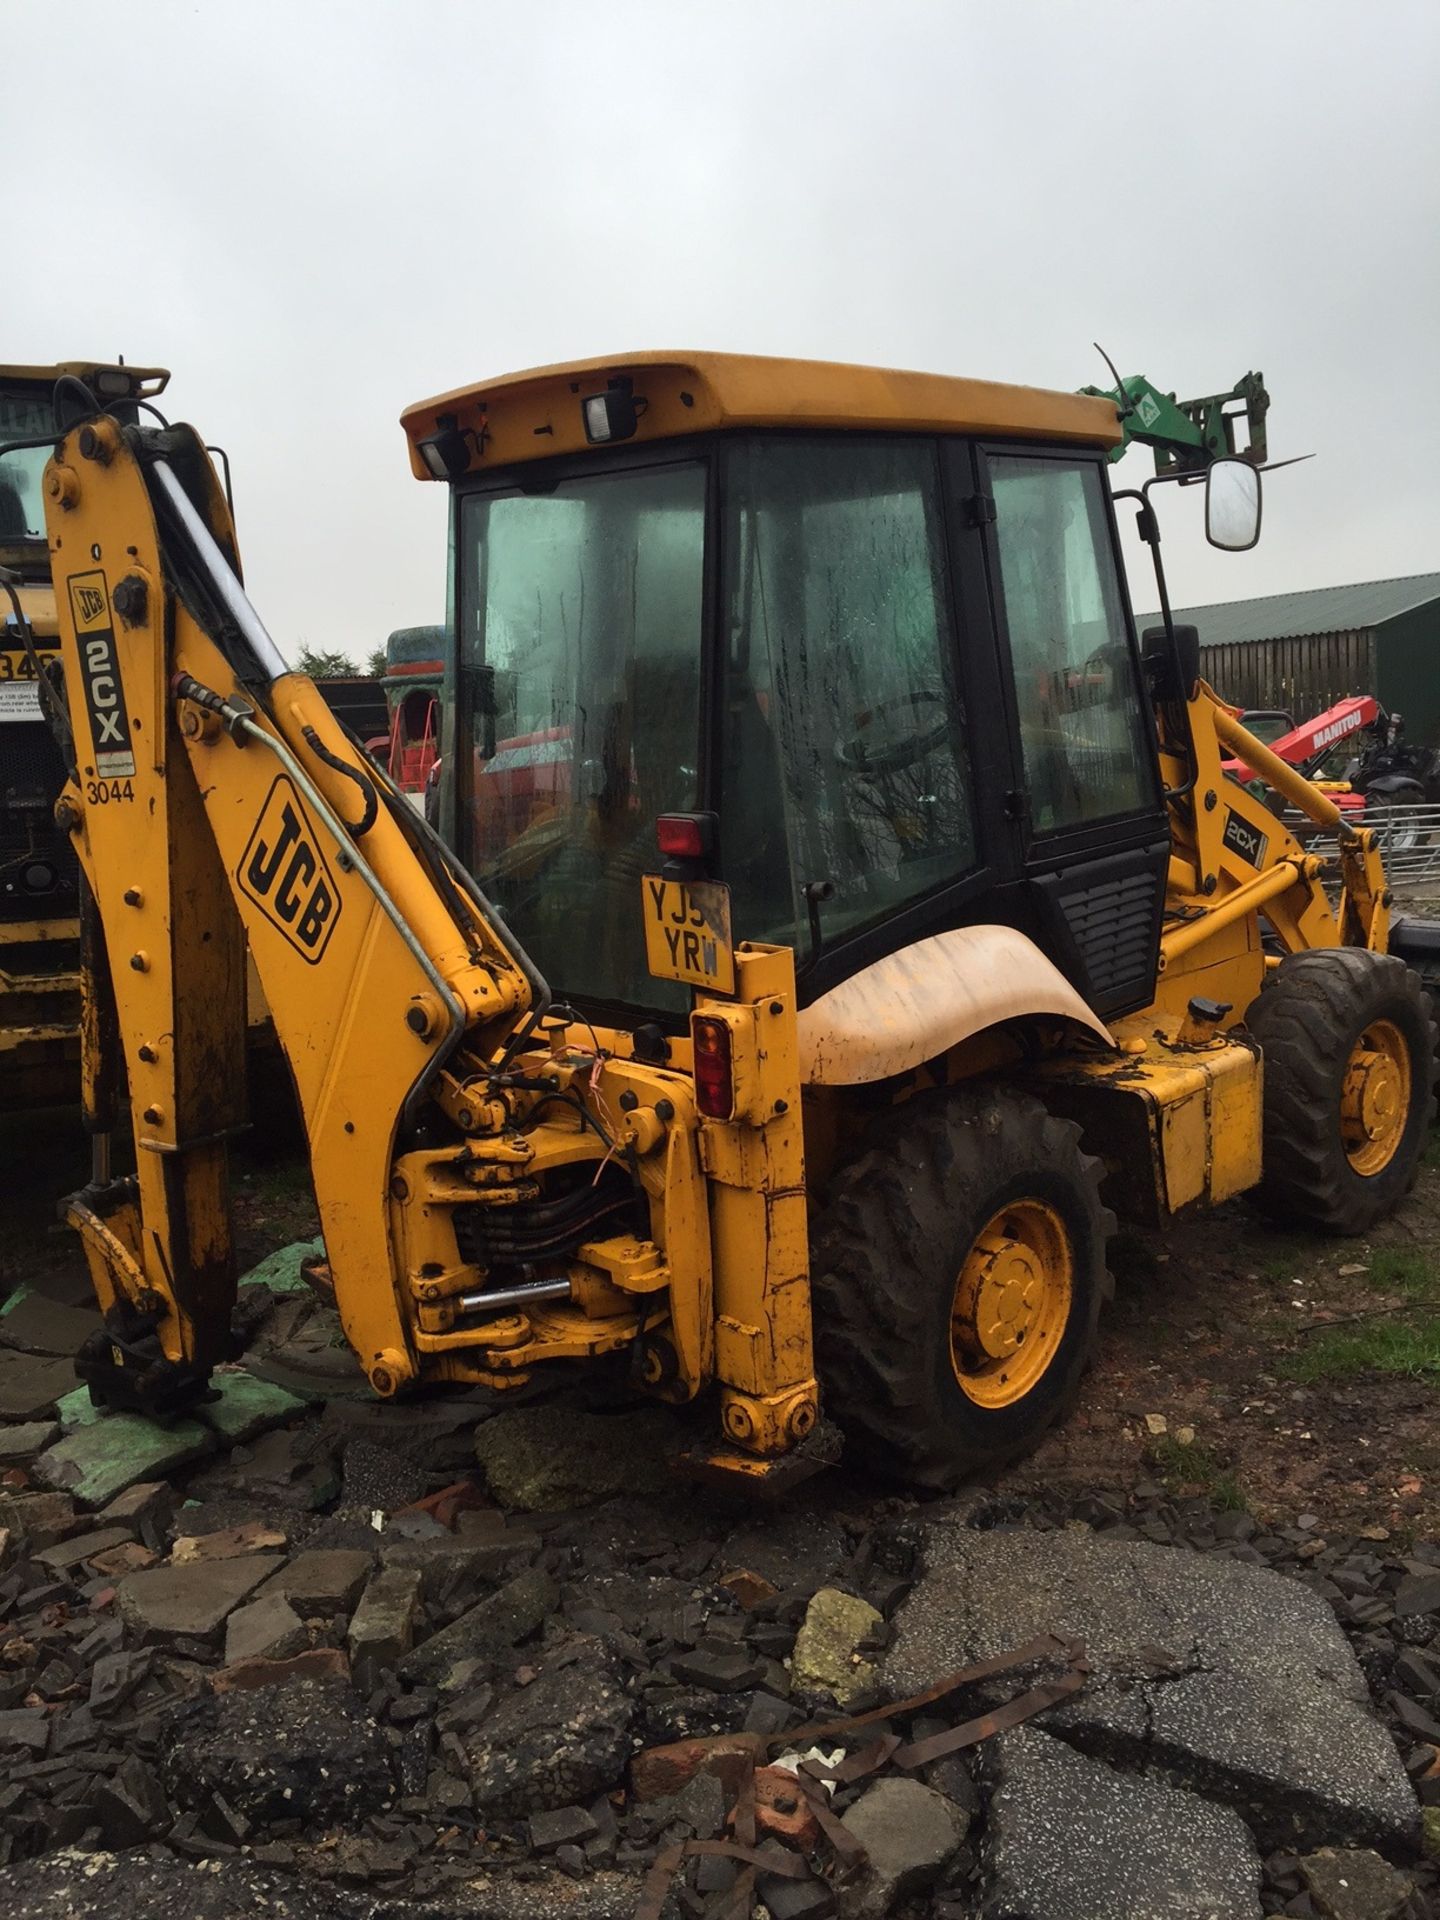 DS - 2003 JCB 2CX STREET MASTER BACKHOE LOADER  EX COUNCIL YEAR OF MANUFACTURE 2003 GOOD CONDITION - - Image 2 of 7